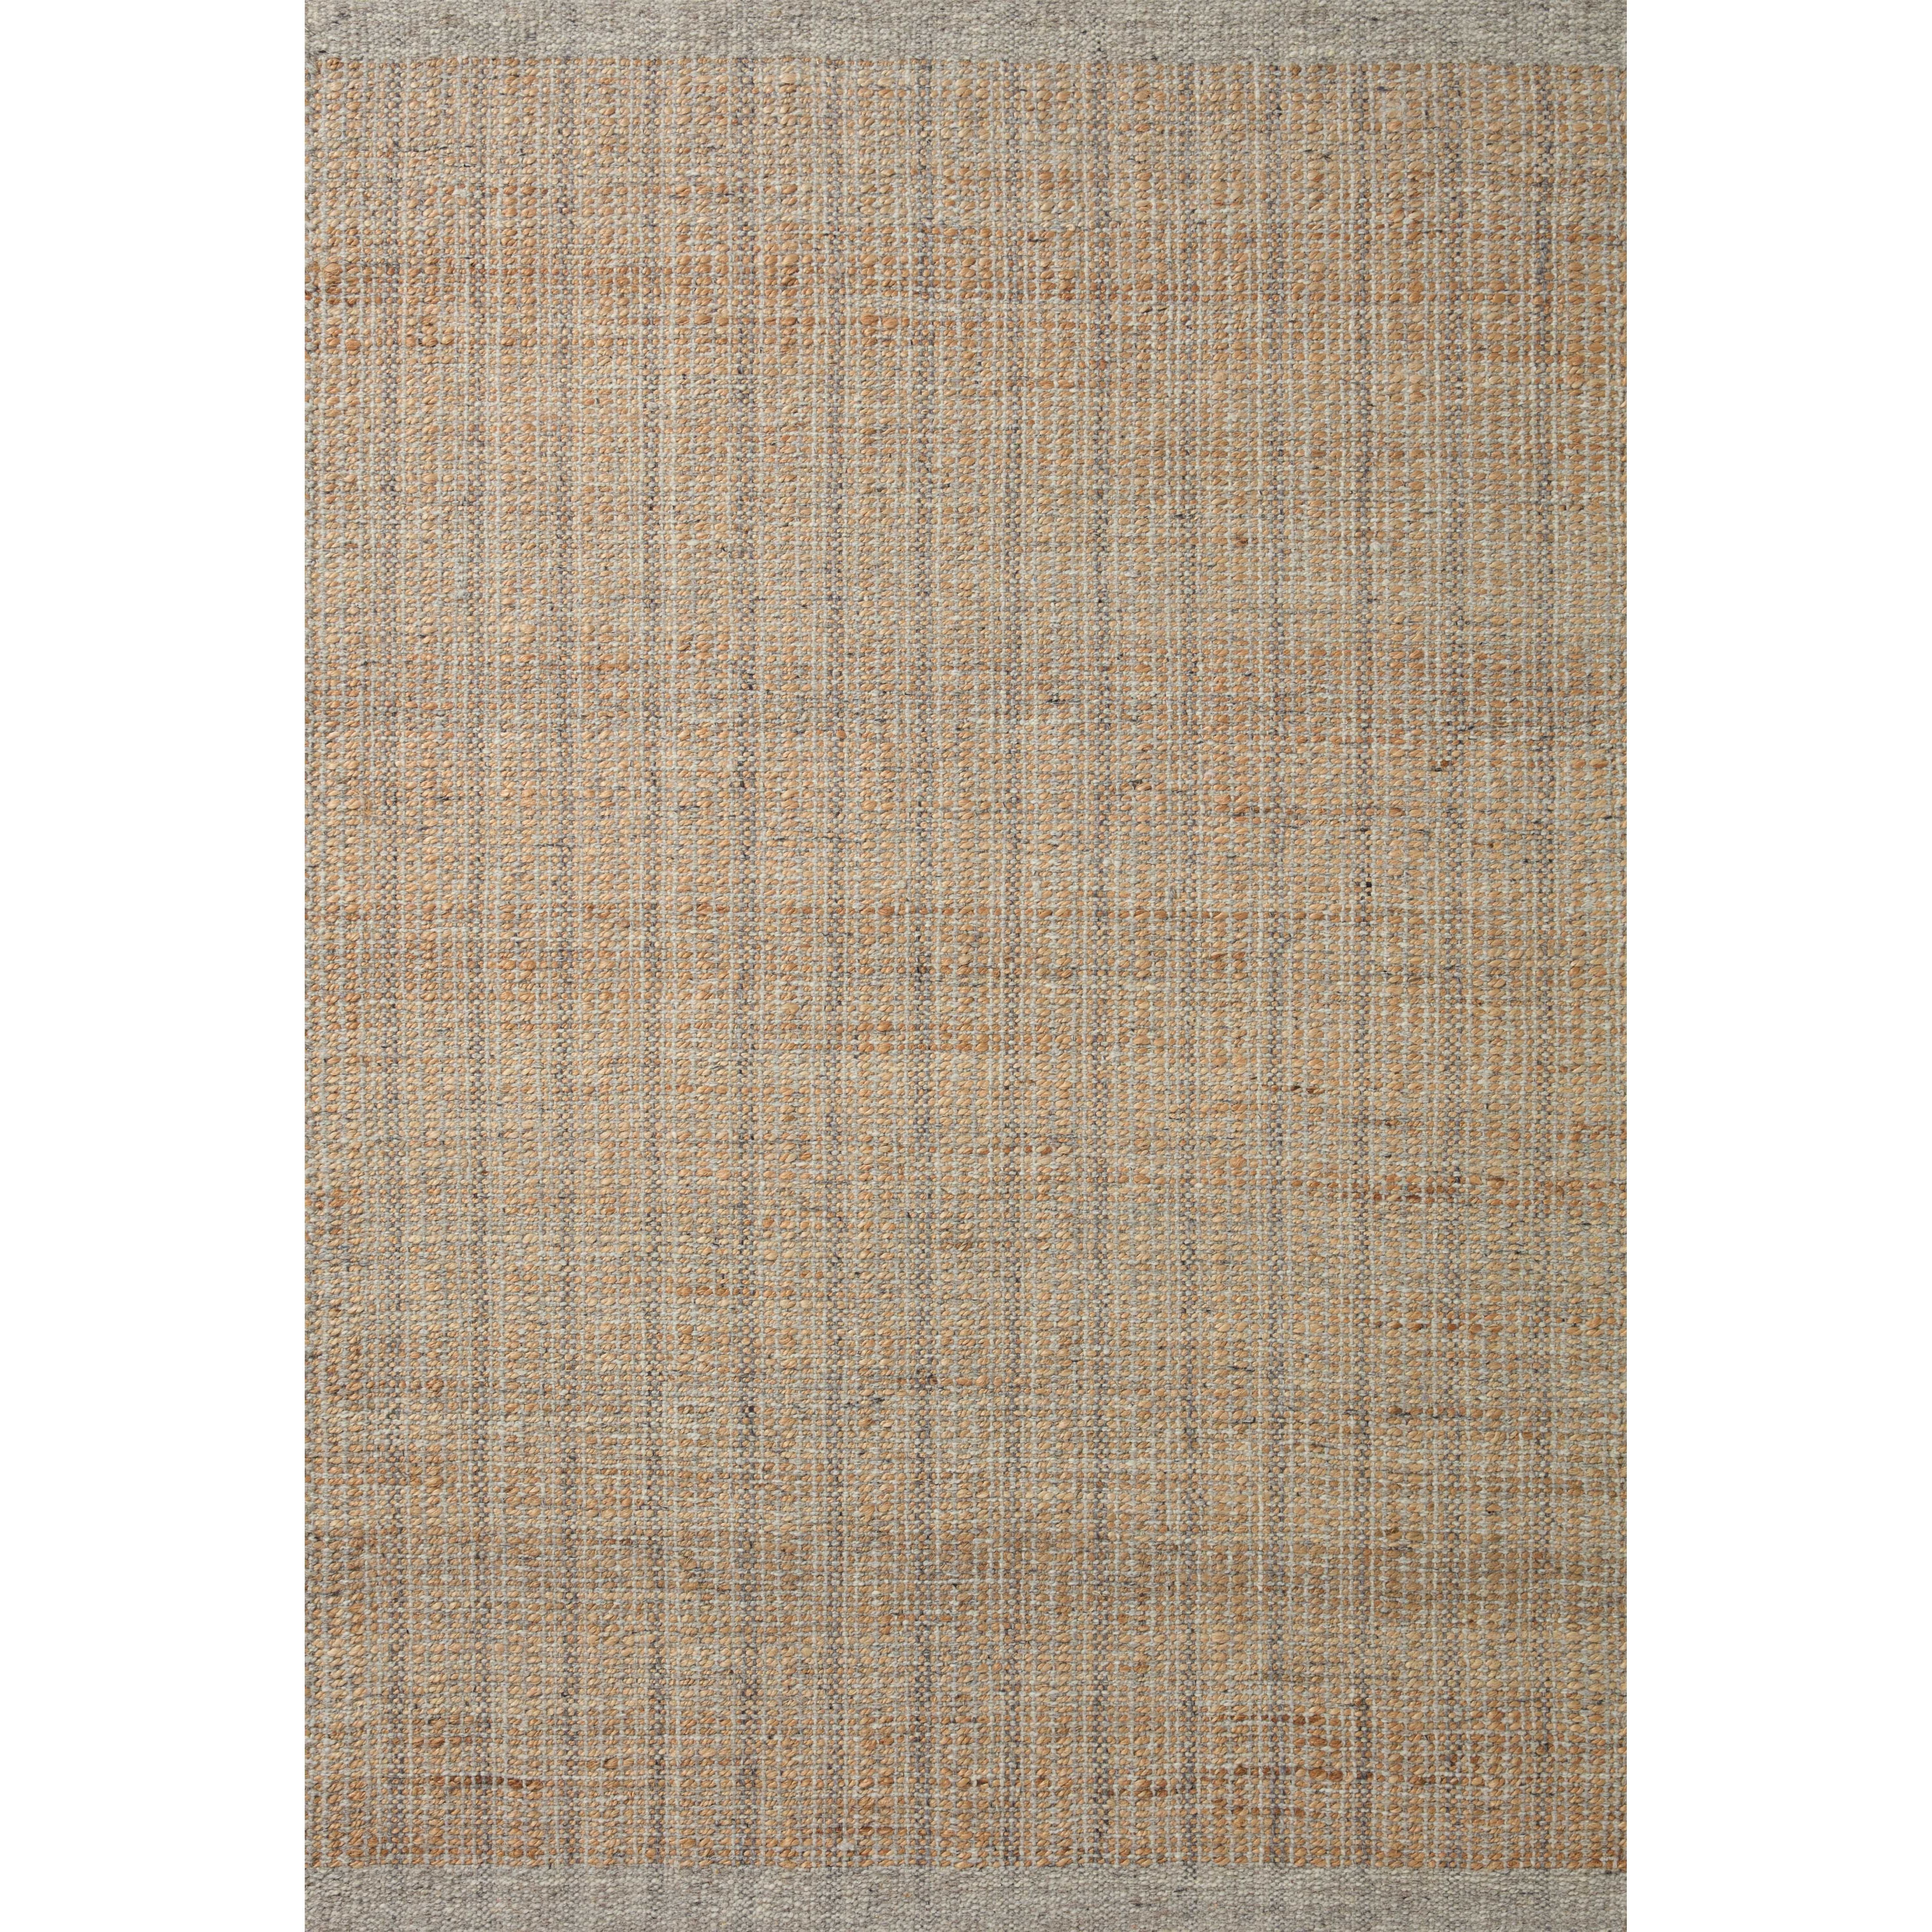 Hand-woven of jute and wool, the Cornwall Lt Grey / Natural Rug has a natural, organic look with a clean and classic striped design. This area rug collection is an elegant neutral that styles easily in a range of living rooms, bedrooms, dining rooms, and even mudrooms. Soft, earth-toned colors complement the rug’s natural materials and aesthetic. Amethyst Home provides interior design, new construction, custom furniture, and area rugs in the Dallas metro area.